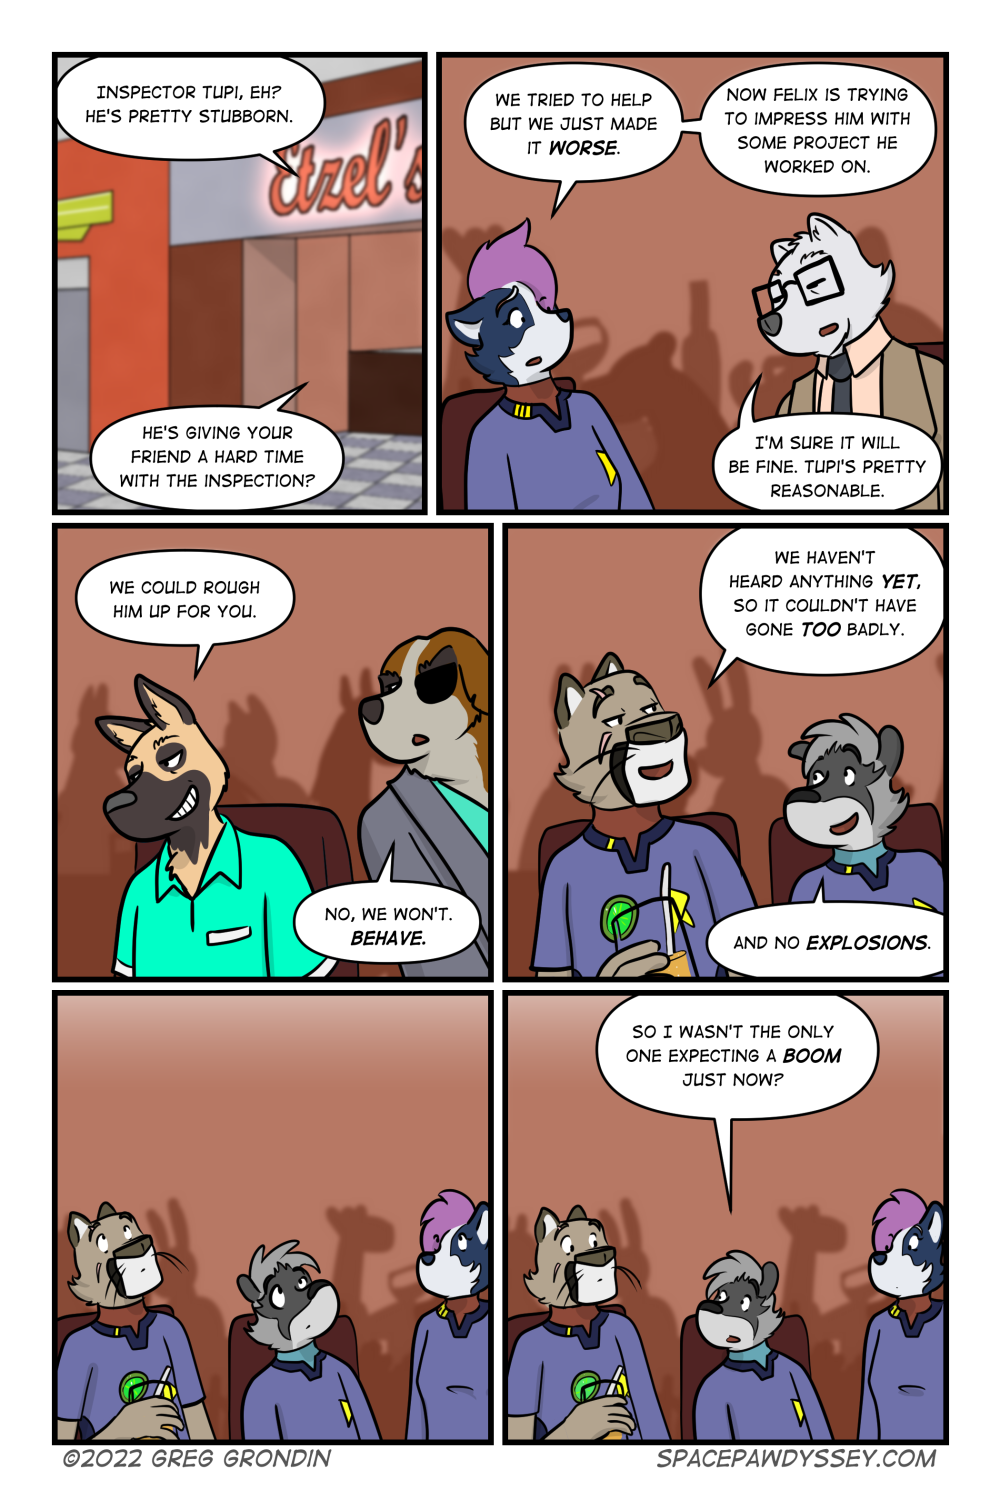 Space Pawdyssey #561